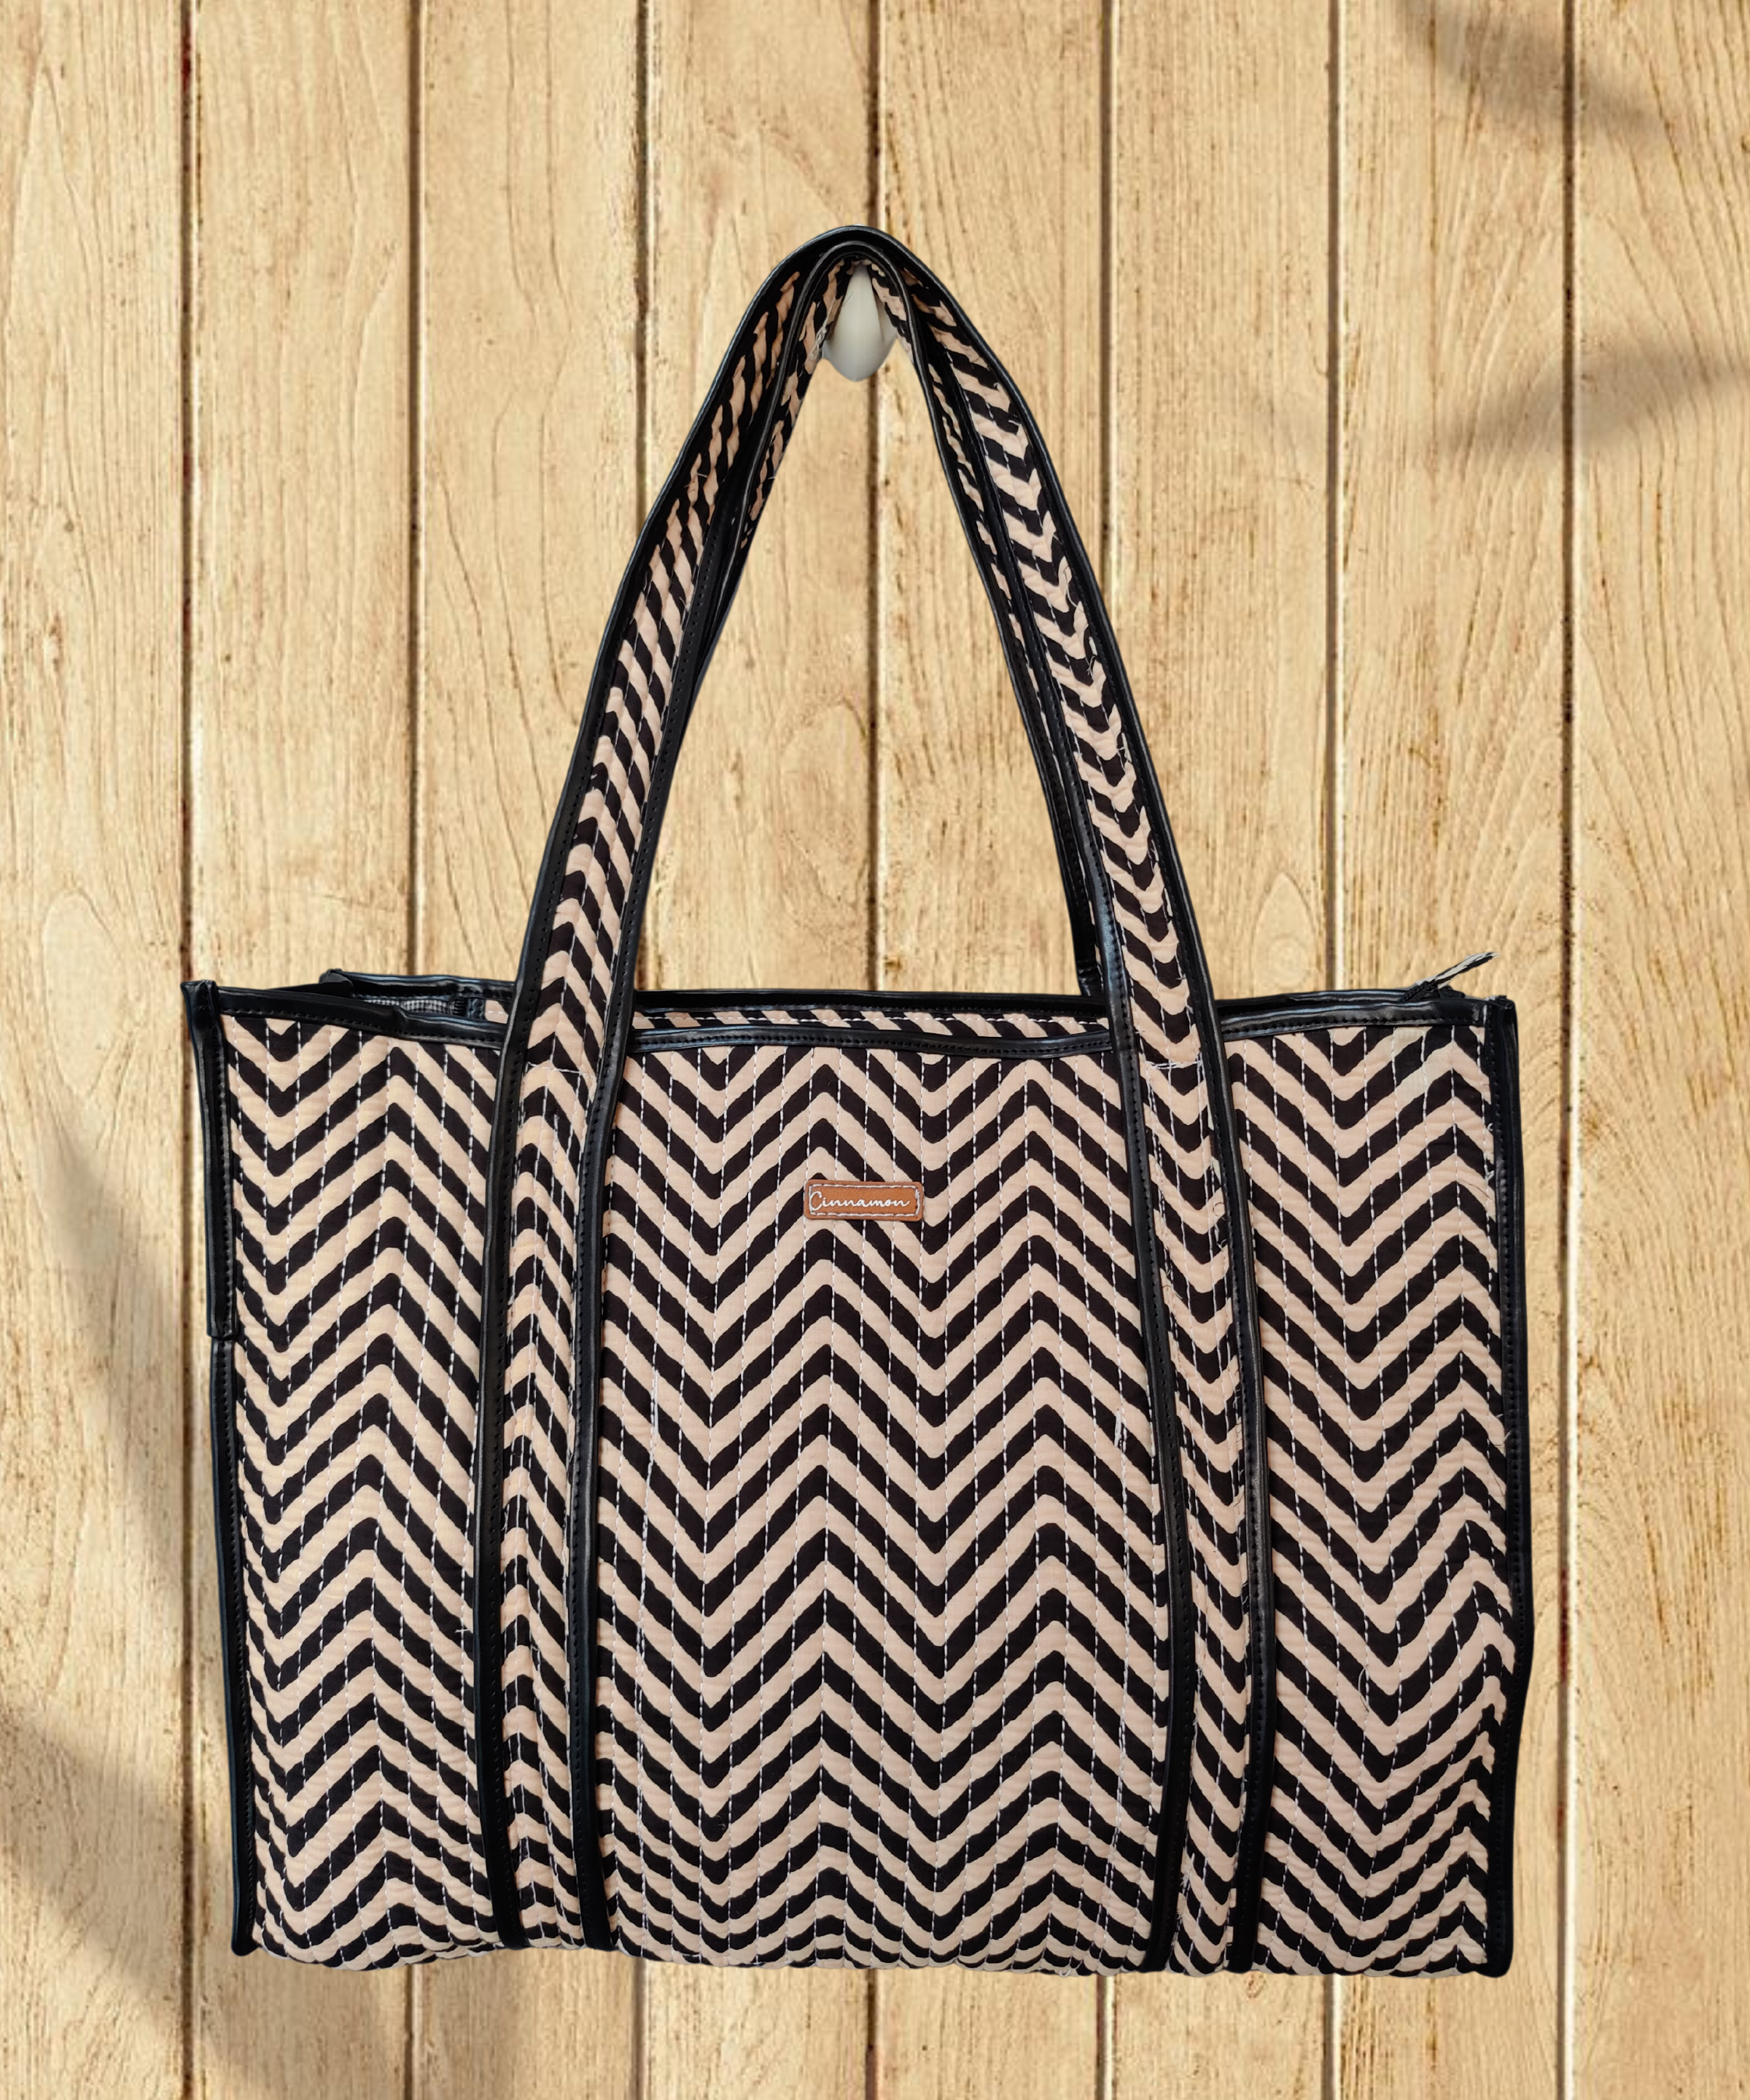 Quilted Mod Fresh Granny Tote Bag Pattern - PDF download - Fancy That  Design House & Co.